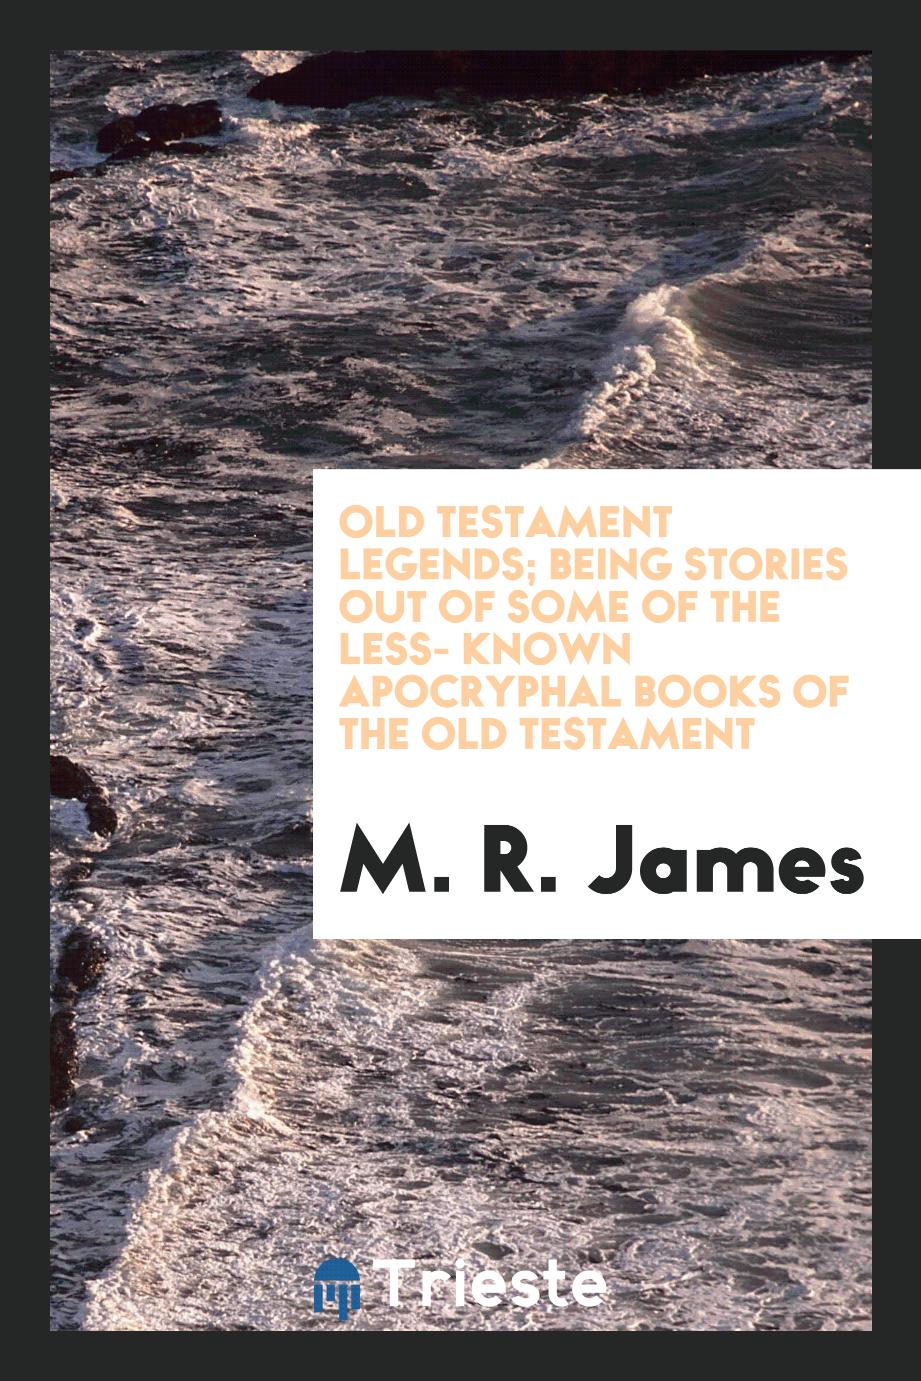 Old Testament legends; being stories out of some of the less- known apocryphal books of the Old Testament